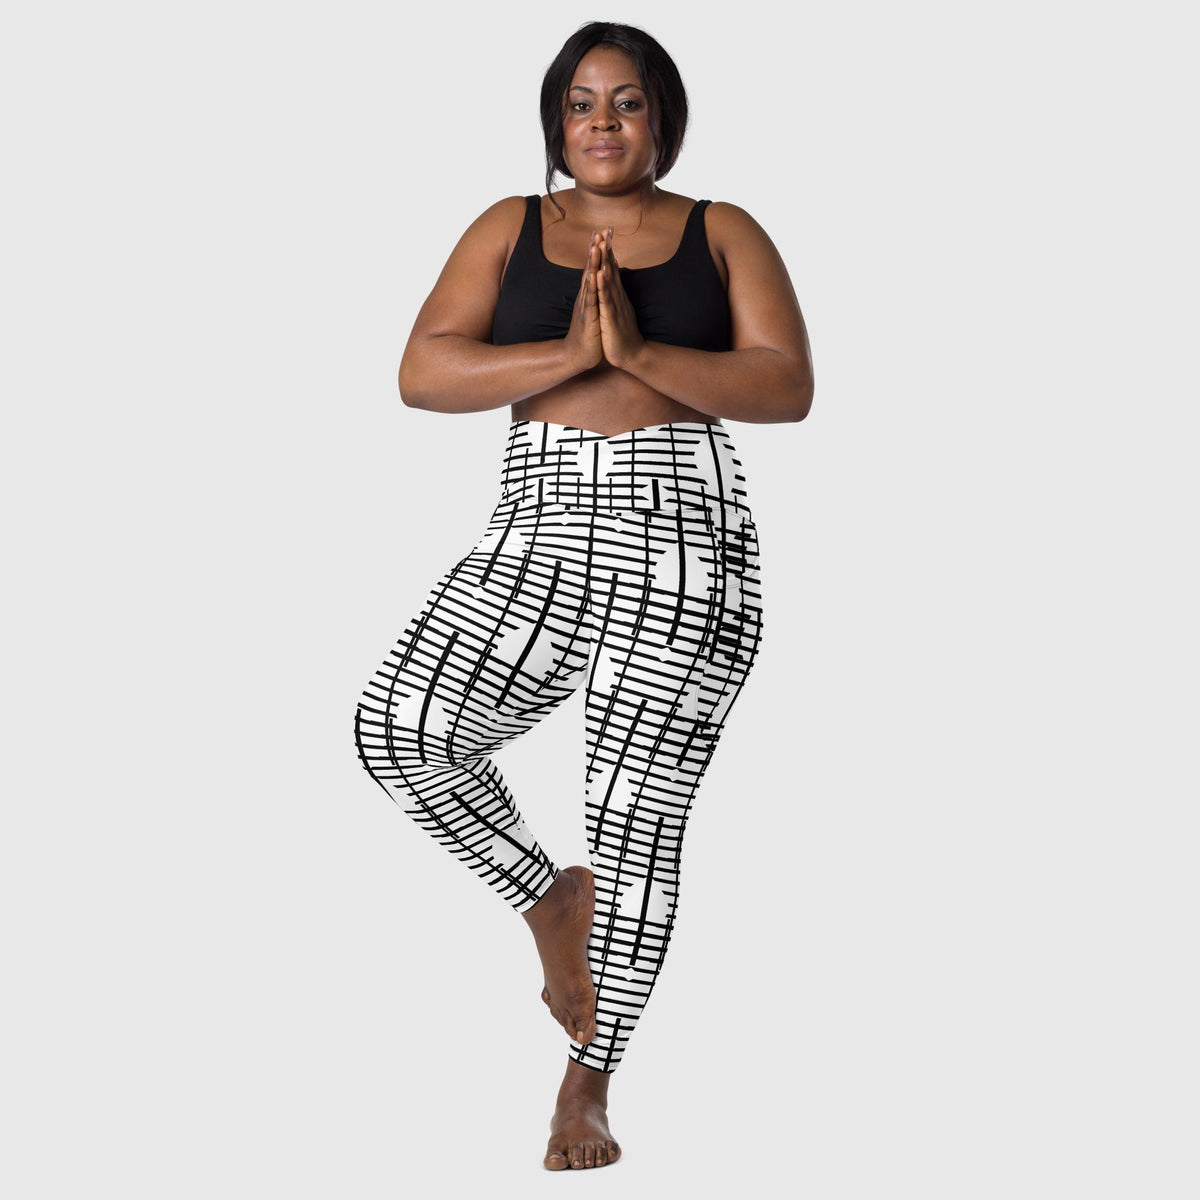 Black Recycled Crossover Leggings with Pockets - Revive Wear     Plus Size Black Recycled Leggings with Pockets. Comfortable plus size leggings with pockets made from recycled materials. Stylish women&#39;s activewear.  
